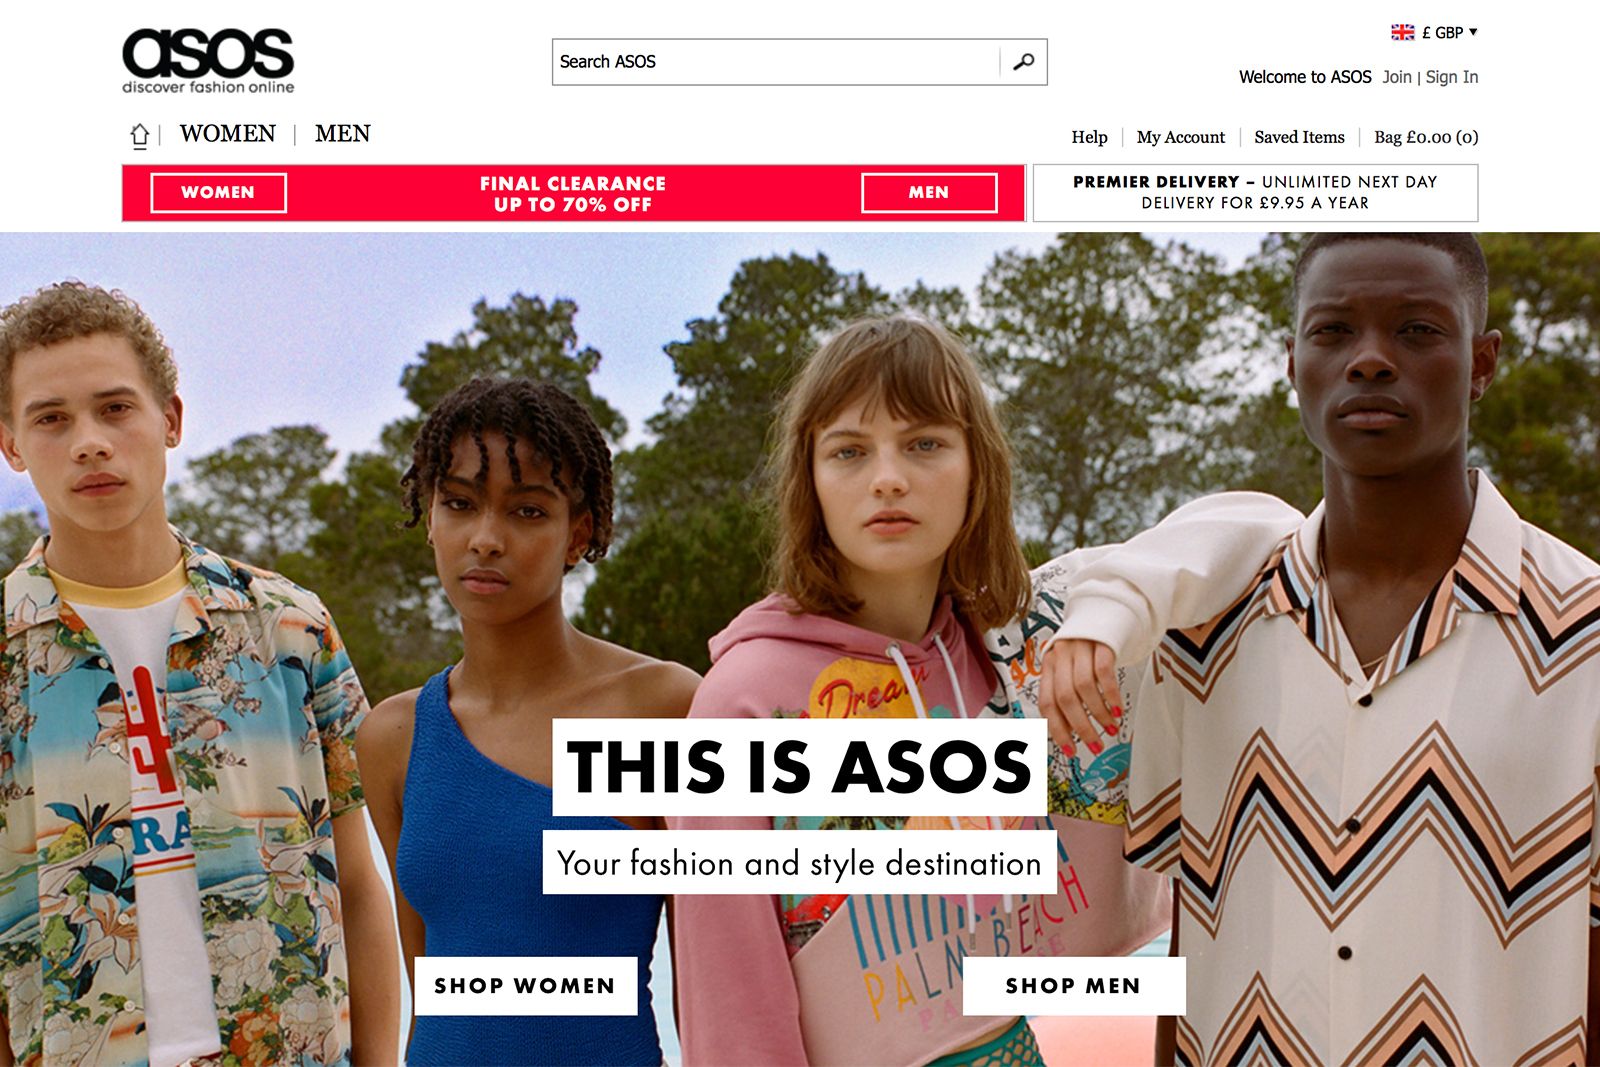 How to use the Asos app to find the right clothes from photos